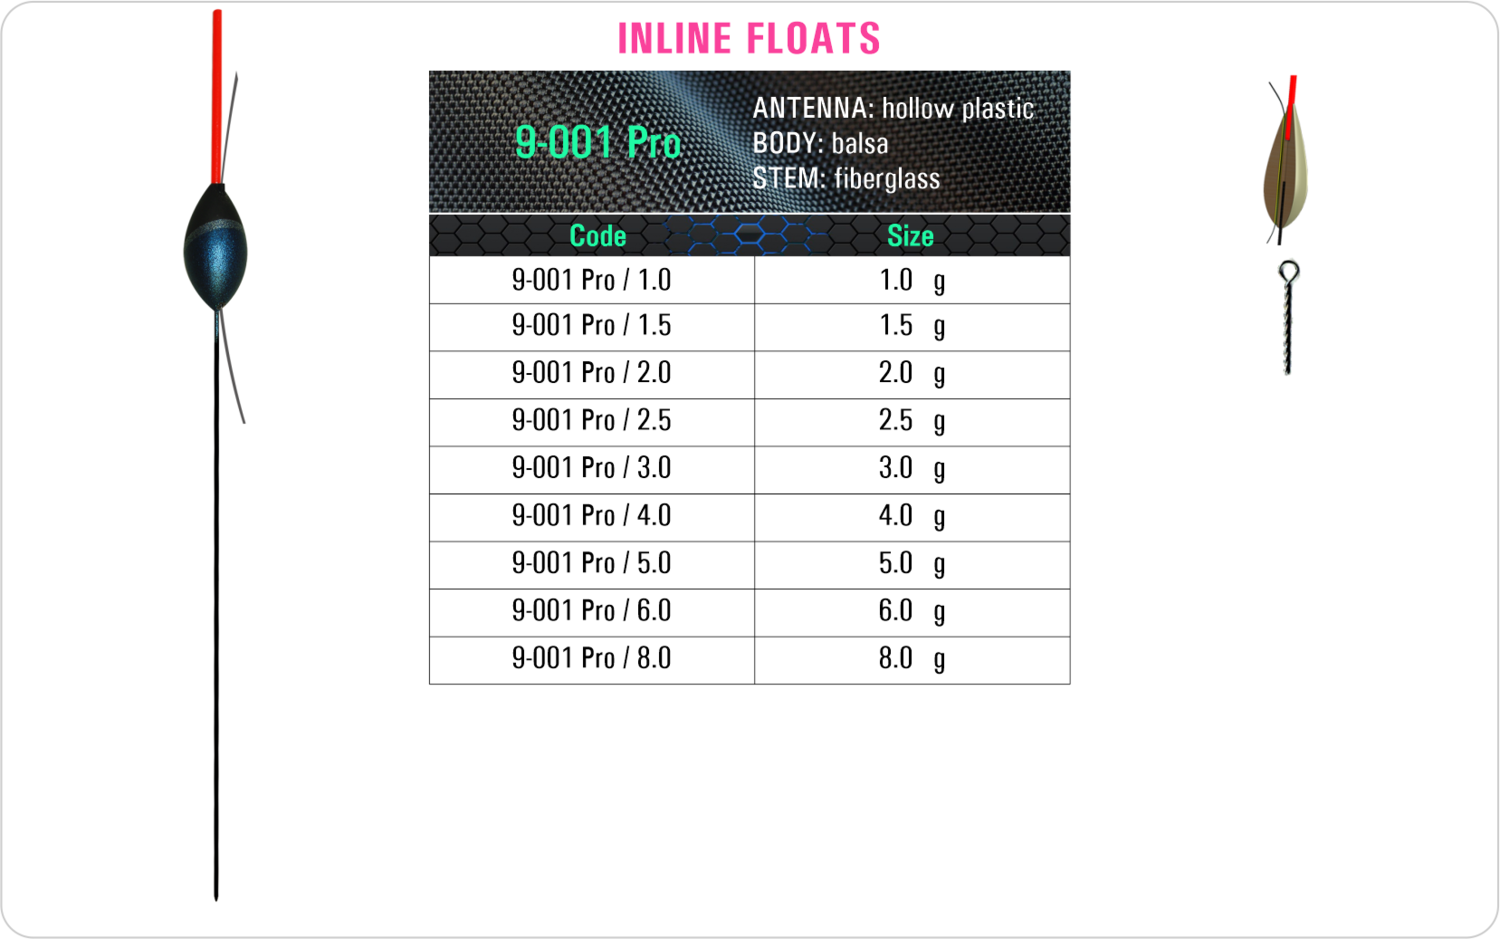 SF 9-001 Pro - Lake and river float model and table containing an additional information about this float with different codes, sizes, types of the body, the stem and the antenna of the float.